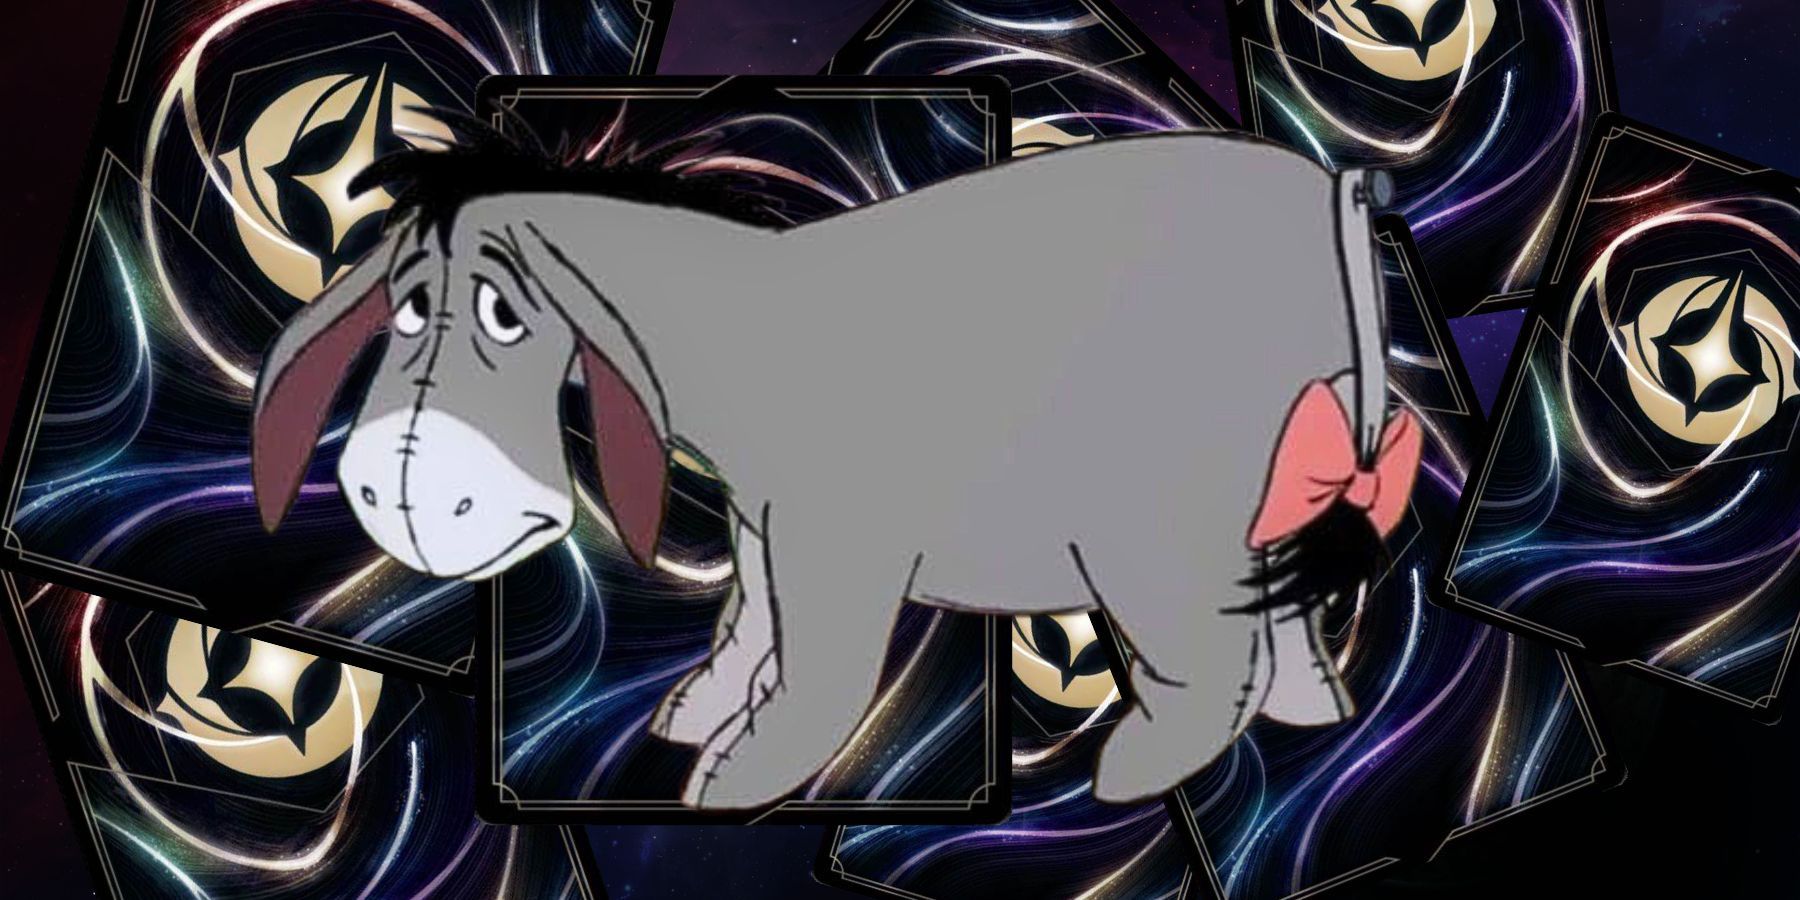 Eeyore in front of some Lorcana card backs